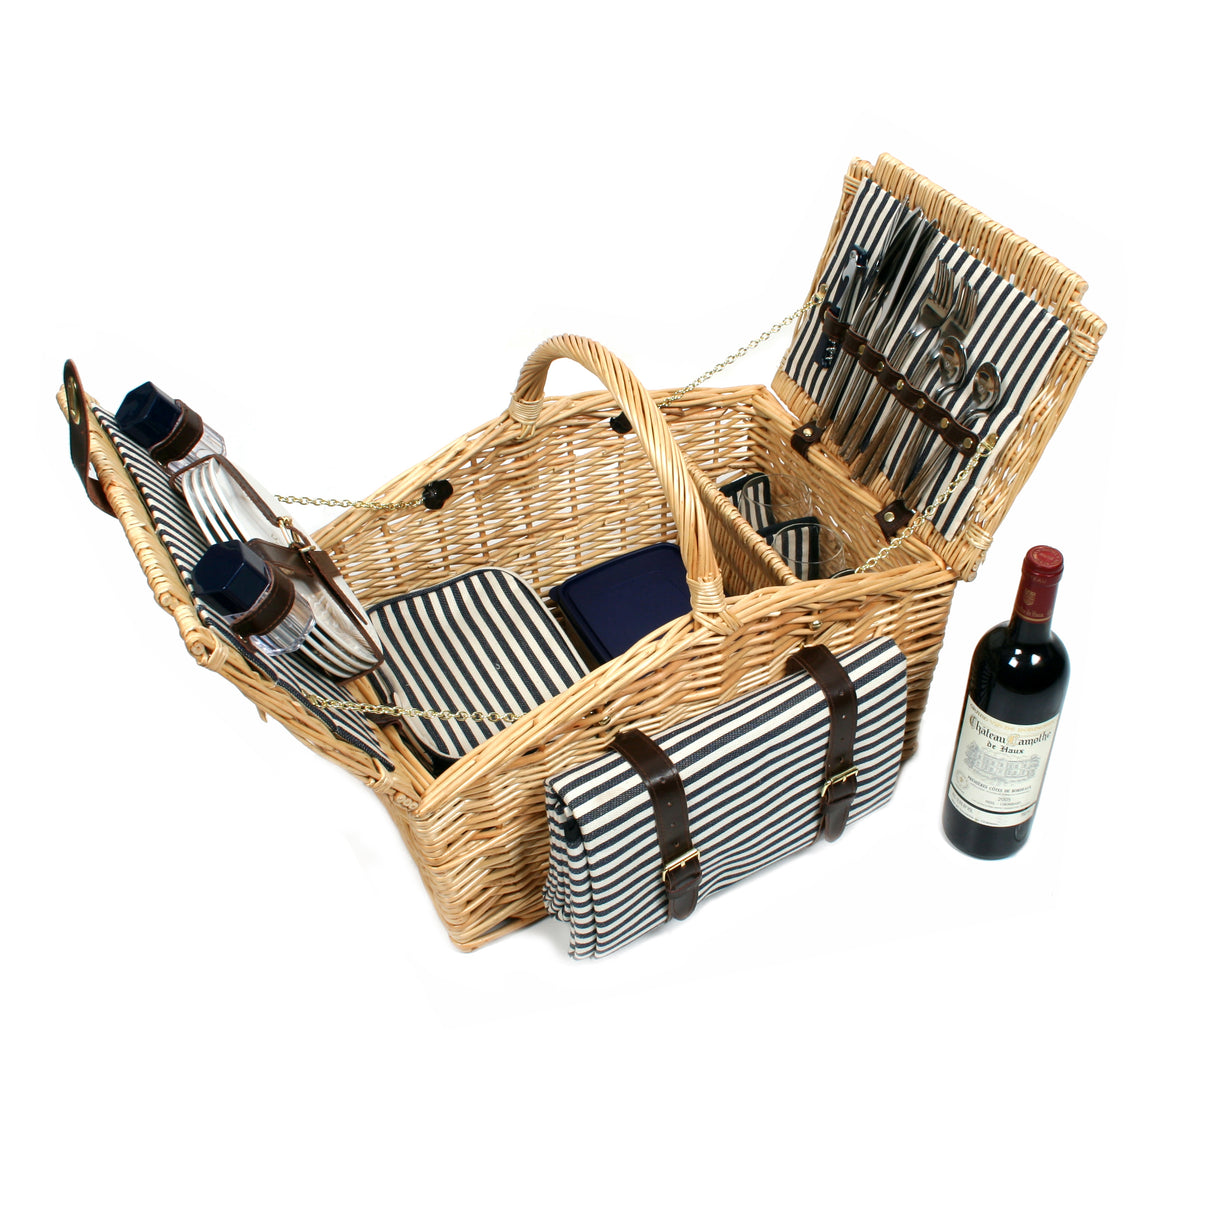 Greenfield Collection Somerley Willow Picnic Hamper for Four People with Matching Blanket - The Greenfield Collection